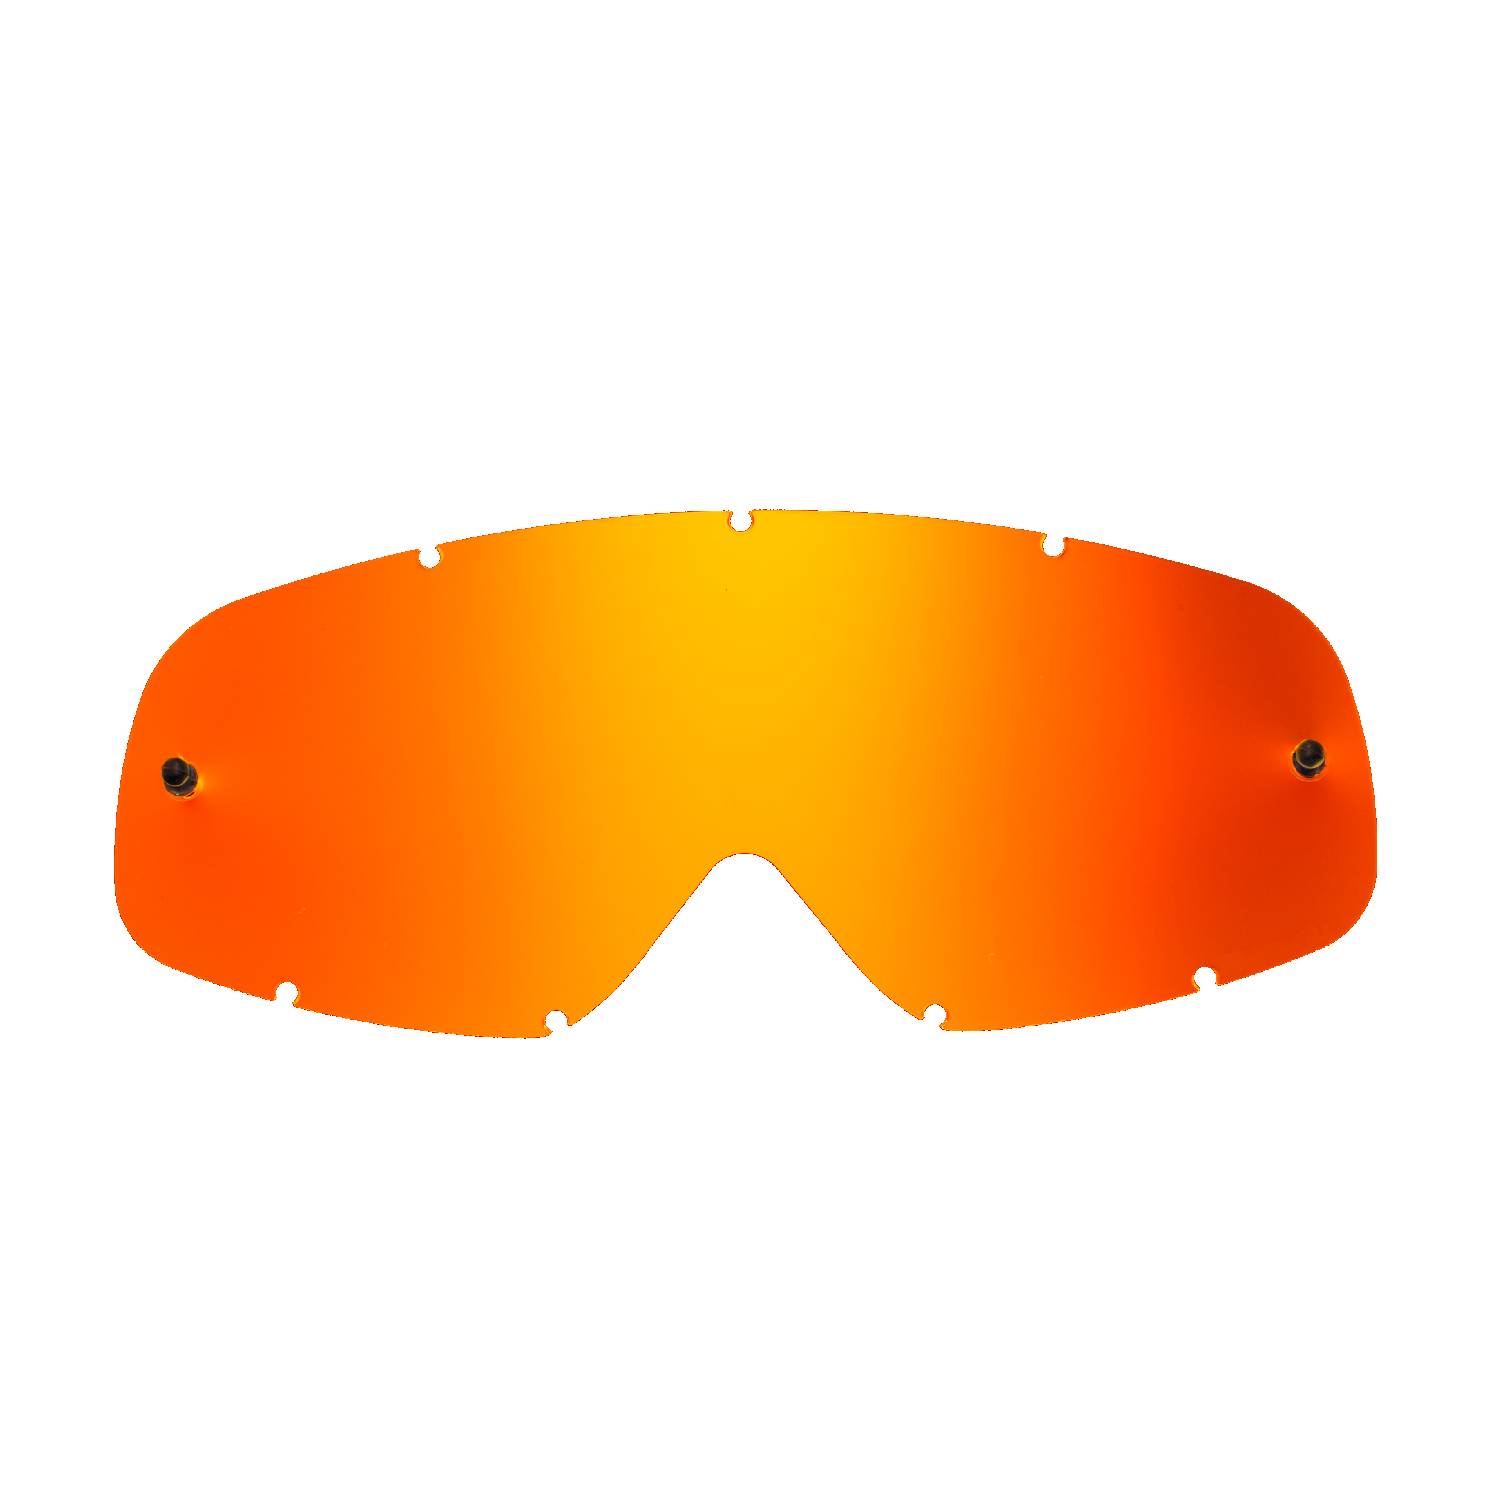 red-toned mirrored replacement lenses compatible for Oakley O-frame goggle